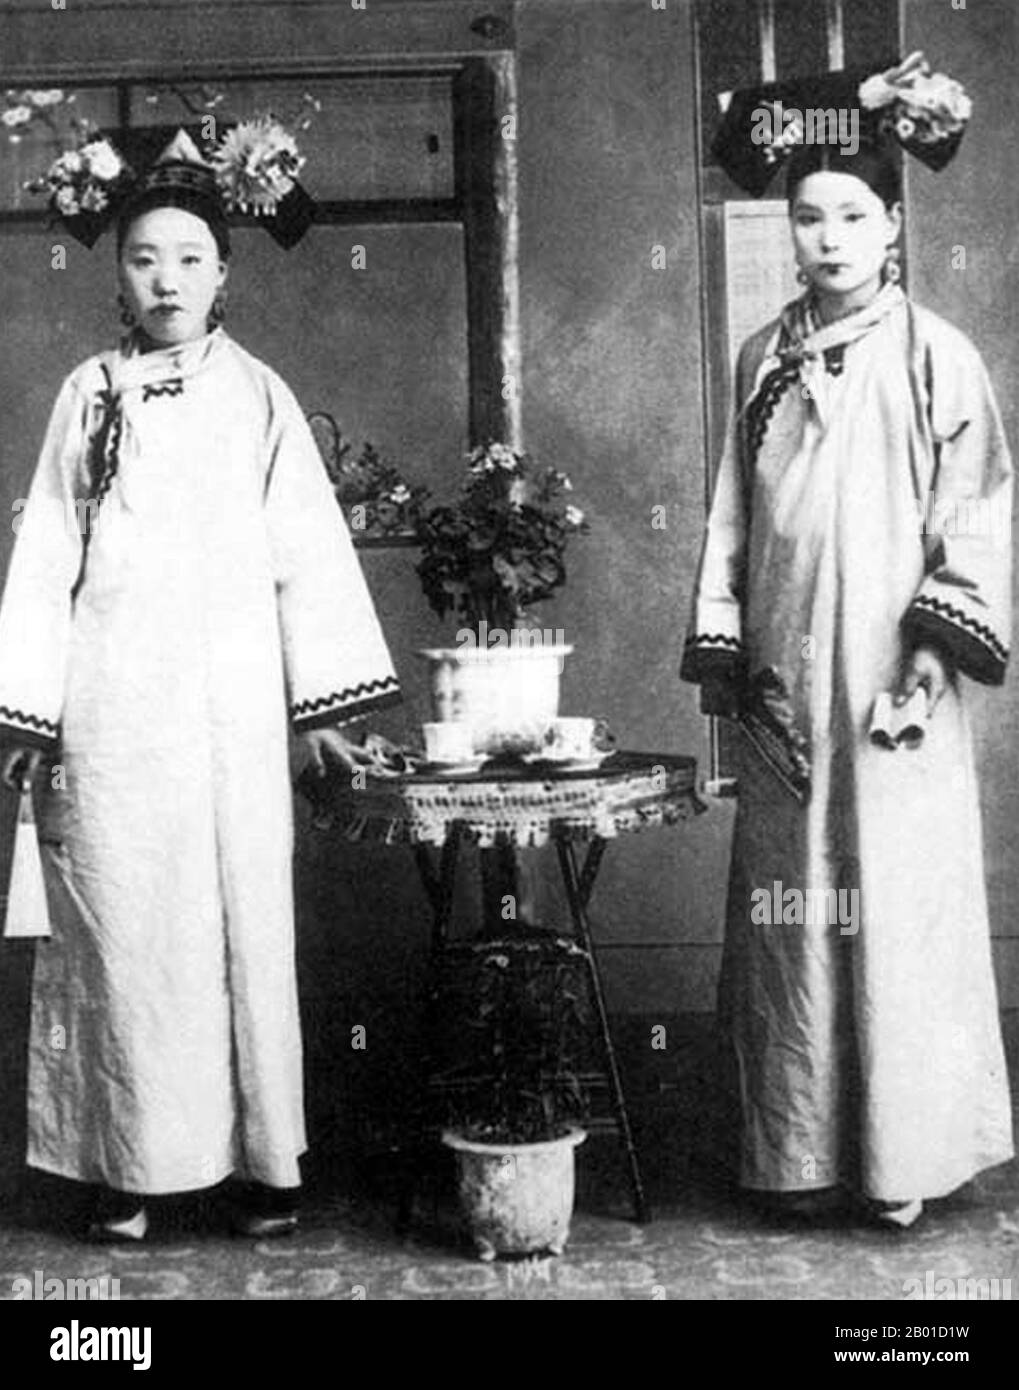 China: Manchu ladies at the Qing Imperial Court in Beijing, c. 1890.  Manchu women of the Forbidden City or Gugong in Beijing pose for a photograph during the Manchu Qing Dynasty (1644-1911). They wear elaborate and expensive dresses. Their faces are whitened with powder, and their lipstick is applied in a narrow band across the centre of their lips following the fashion of the time. Stock Photo